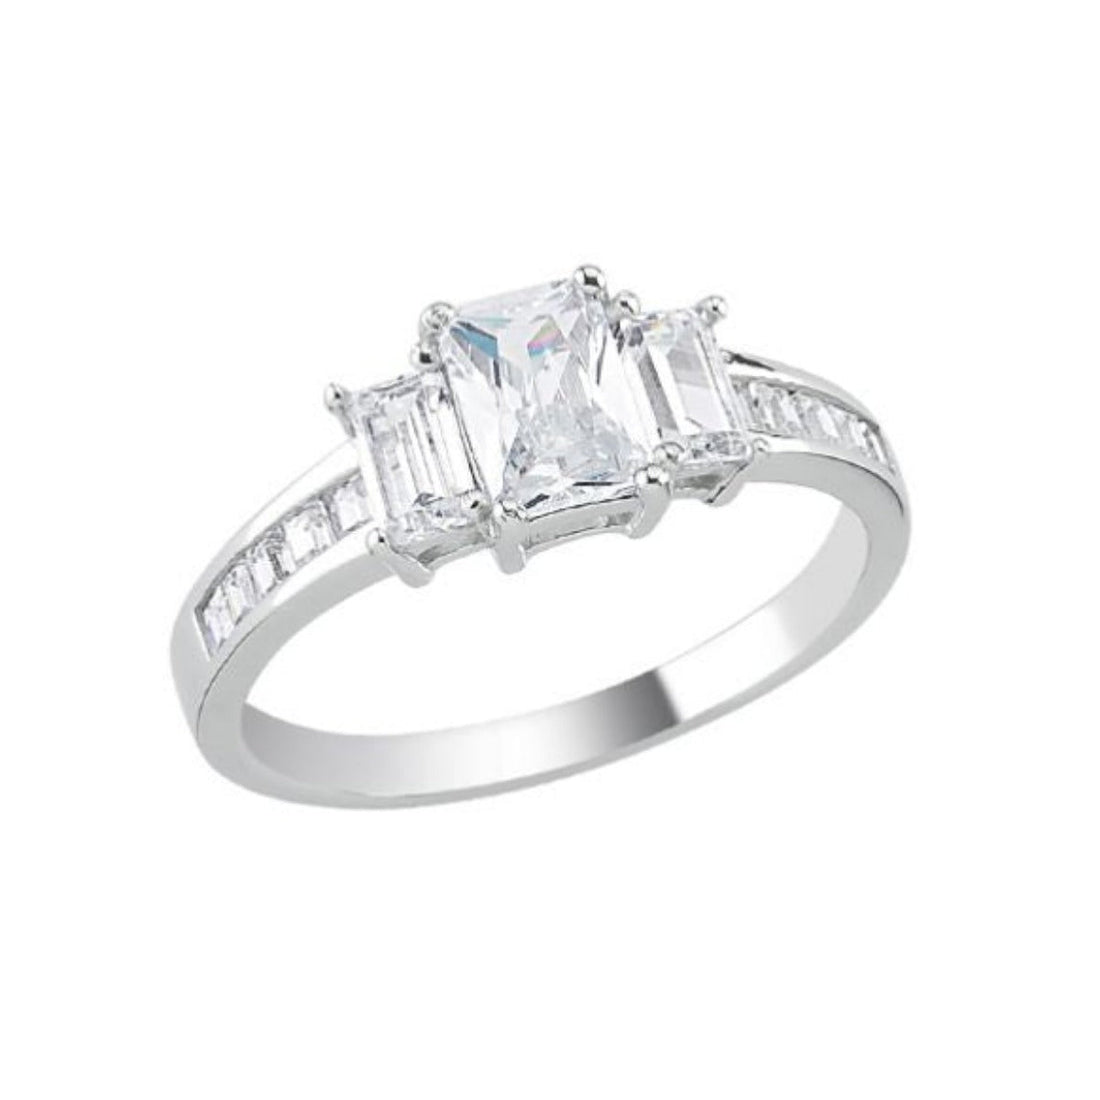 Baguette Cut Channel Set Cubic Zirconia Three Stone Ring in Rhodium Plated Silver